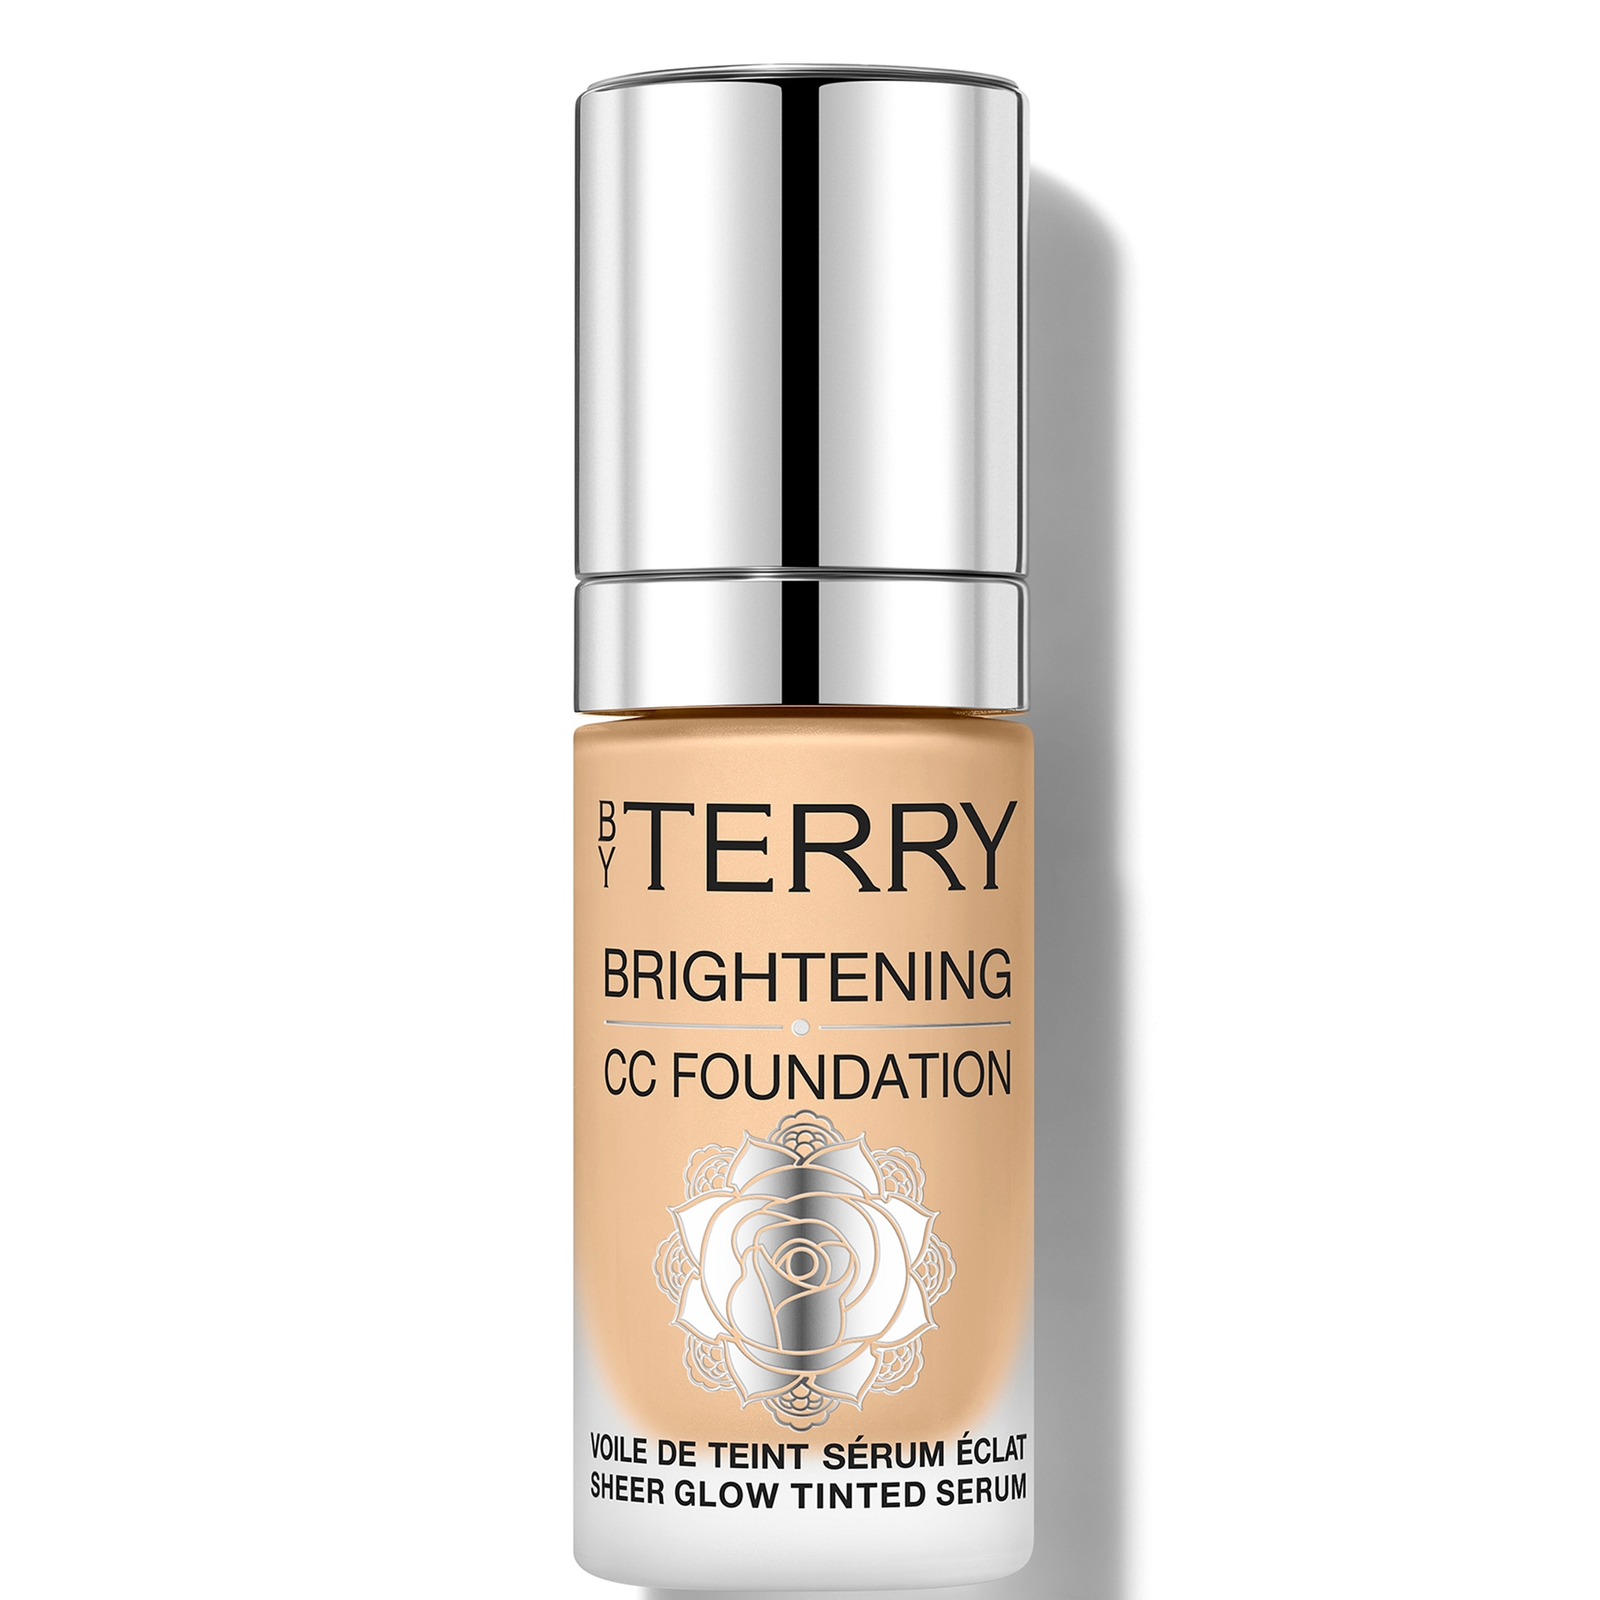 Image of By Terry Brightening CC Foundation 30ml (Various Shades) - 4W - MEDIUM WARM